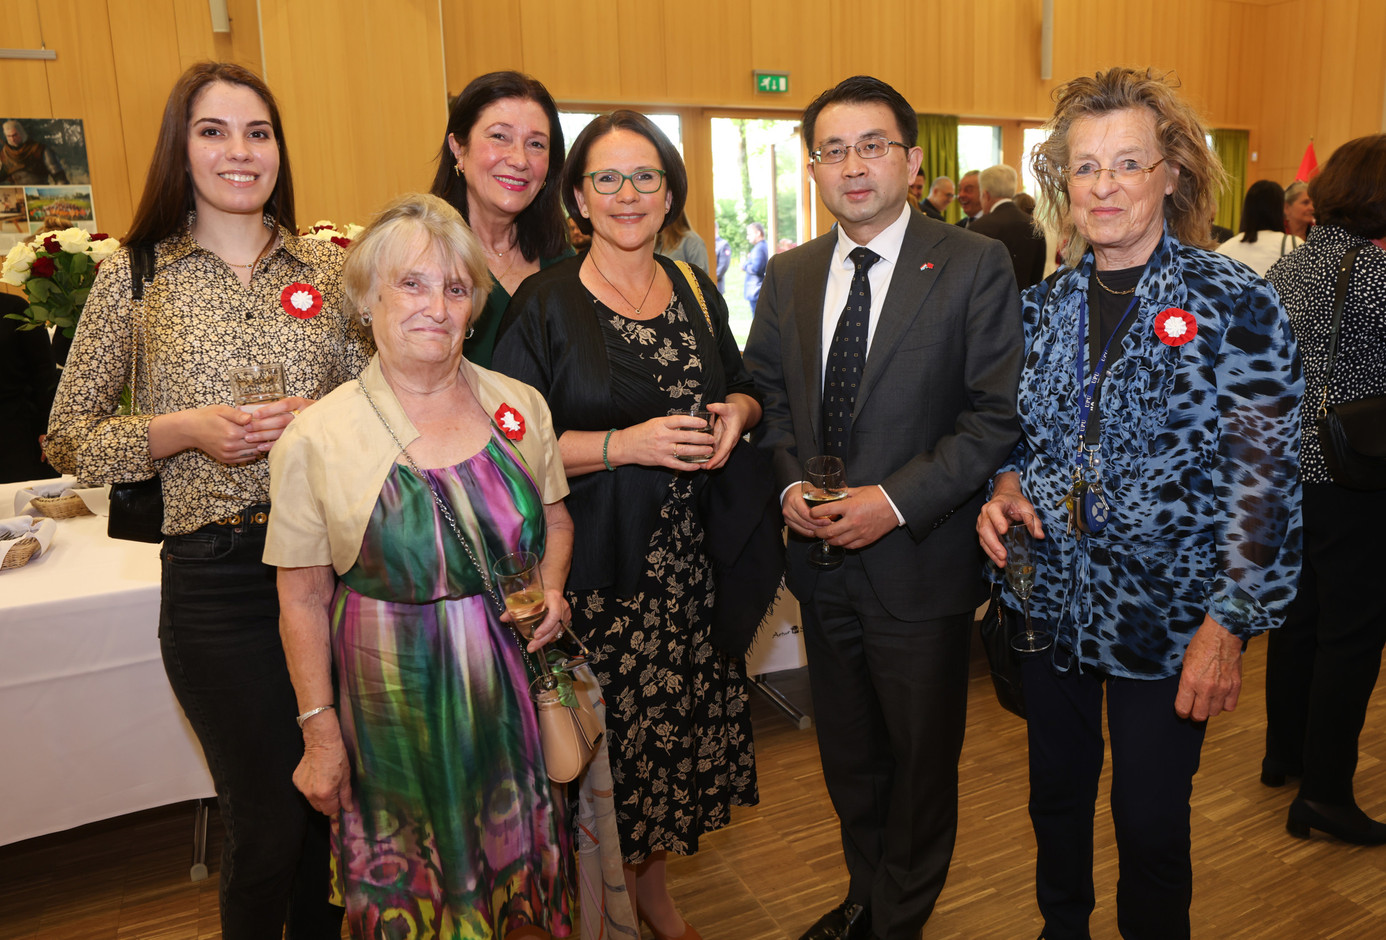 Alexandra Birgen, Andreline Birgen, Yuriko Backes, China’s ambassador to Luxembourg Hua Ning, Maggy Biwer and Bénédicte Berg at the 3rd May Constitution Day event. Photo: Guy Wolff/Maison Moderne